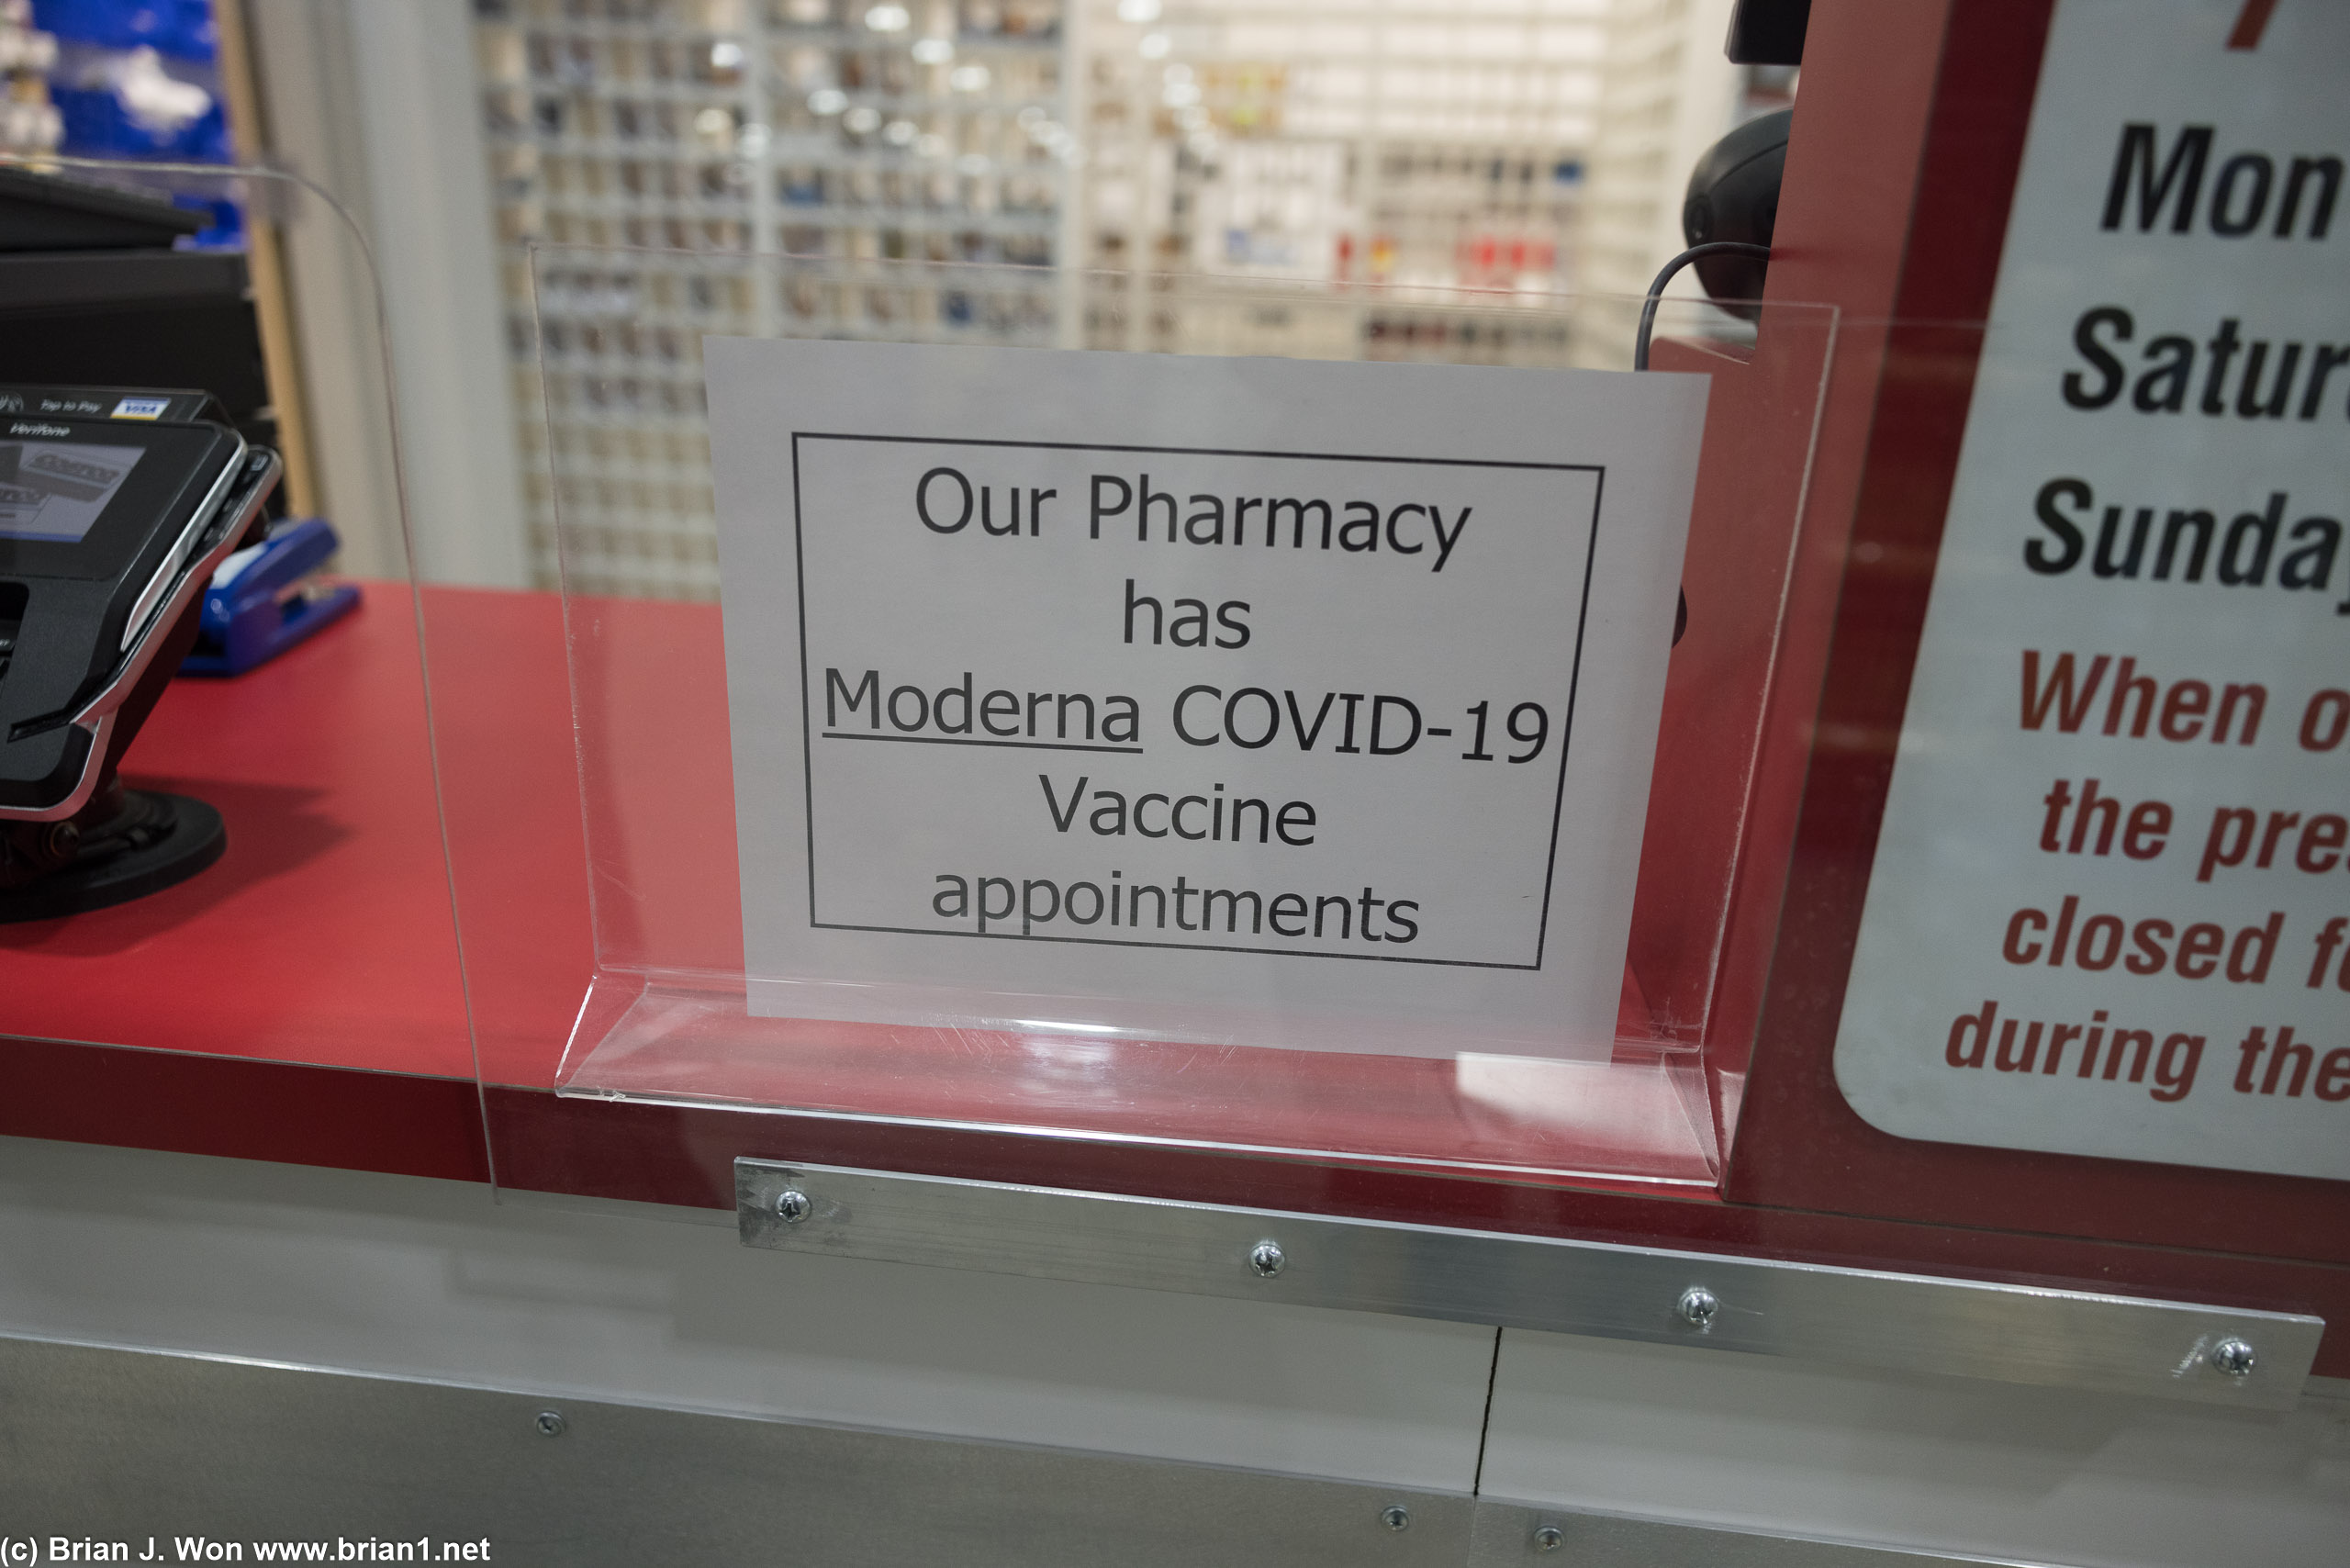 They have COVID-19 vaccines!